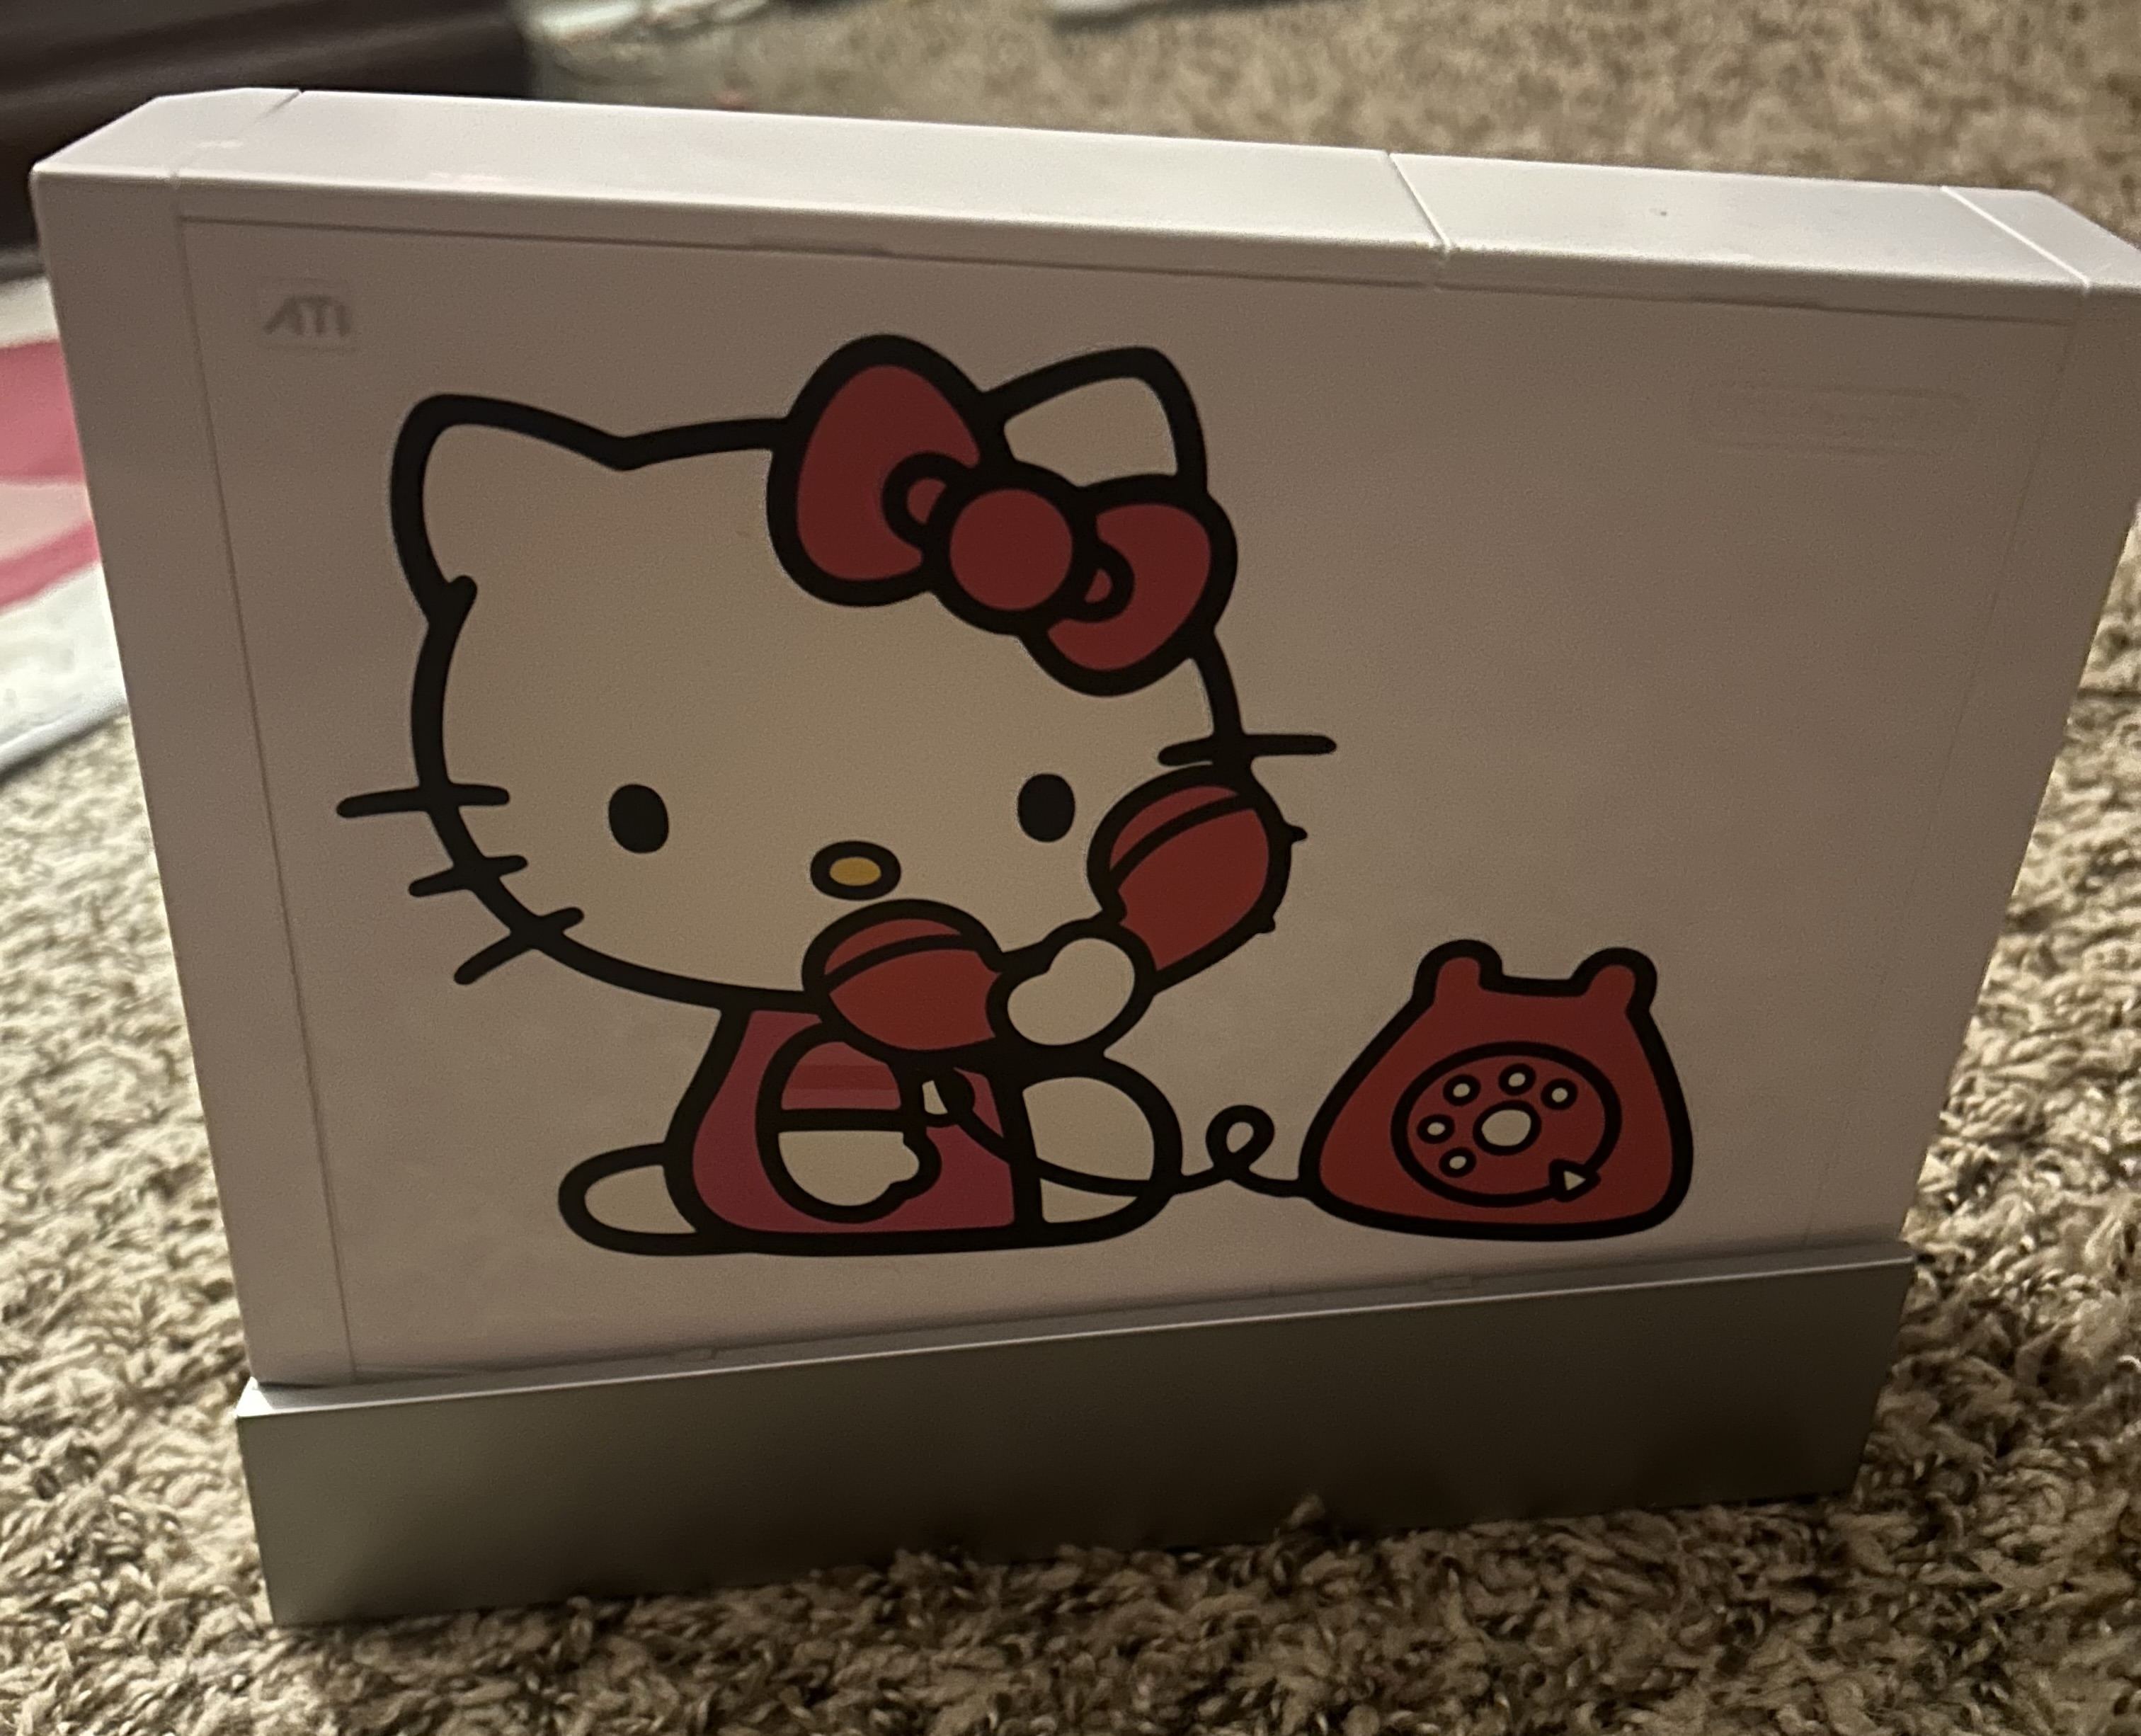 Wii Side View with Hello Kitty on a Telephone Sticker